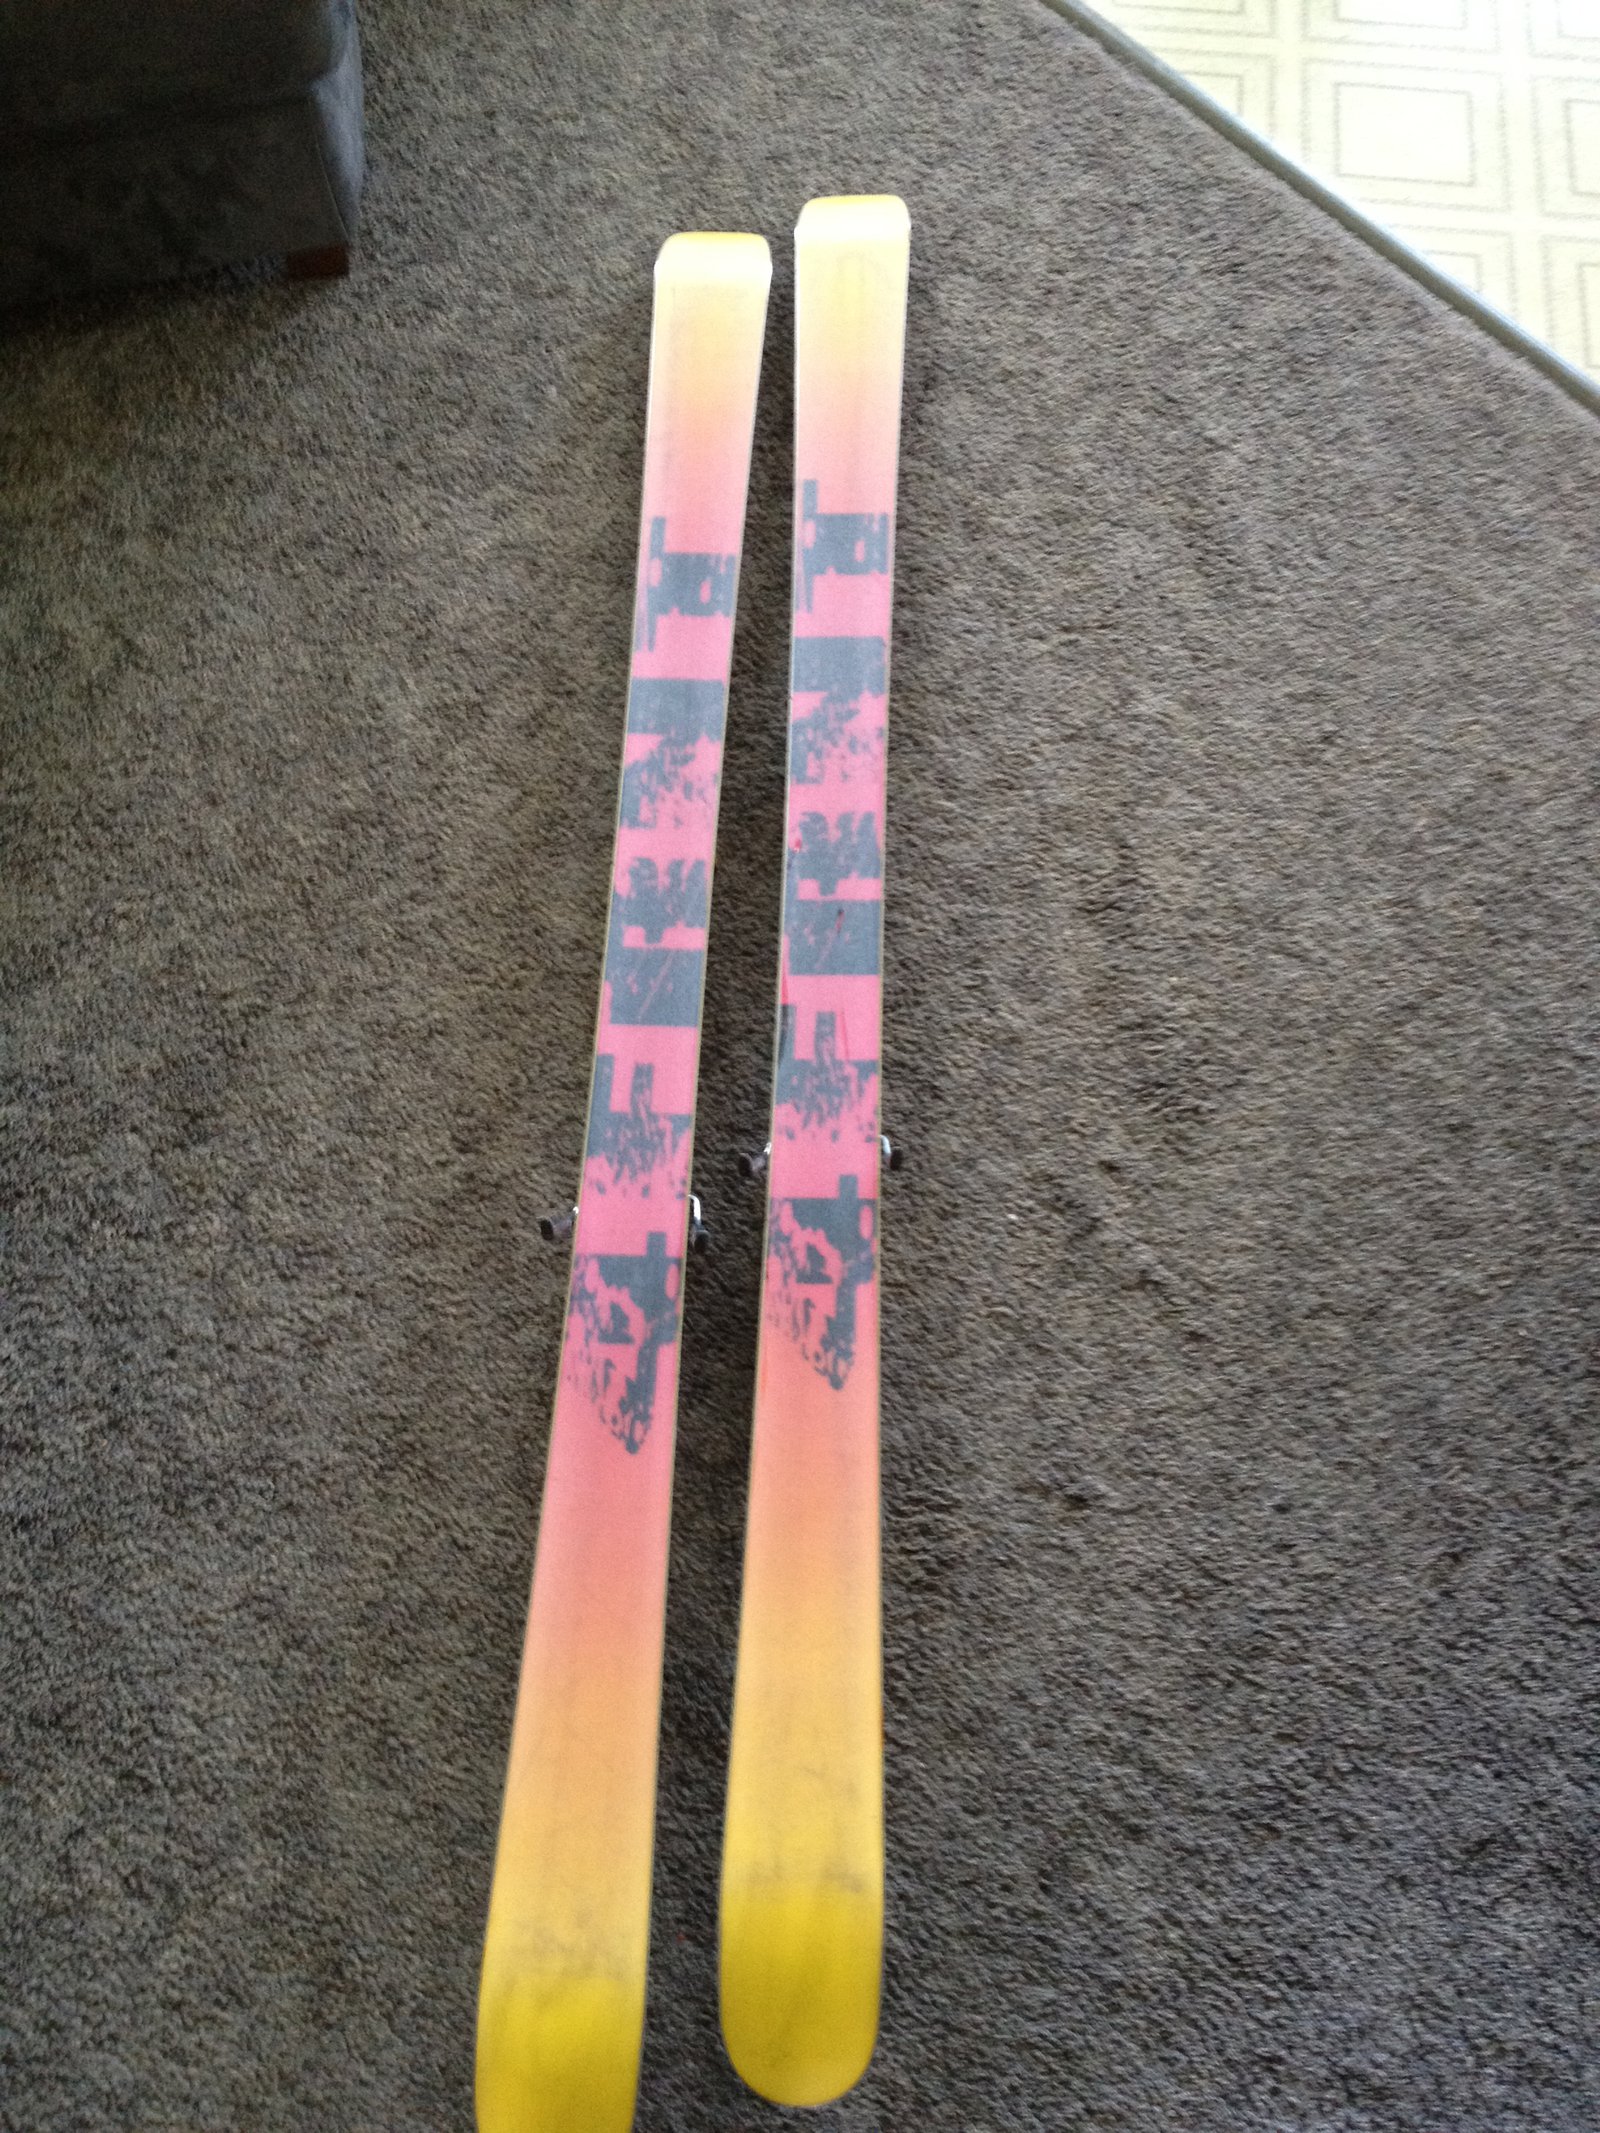 skis for sale 